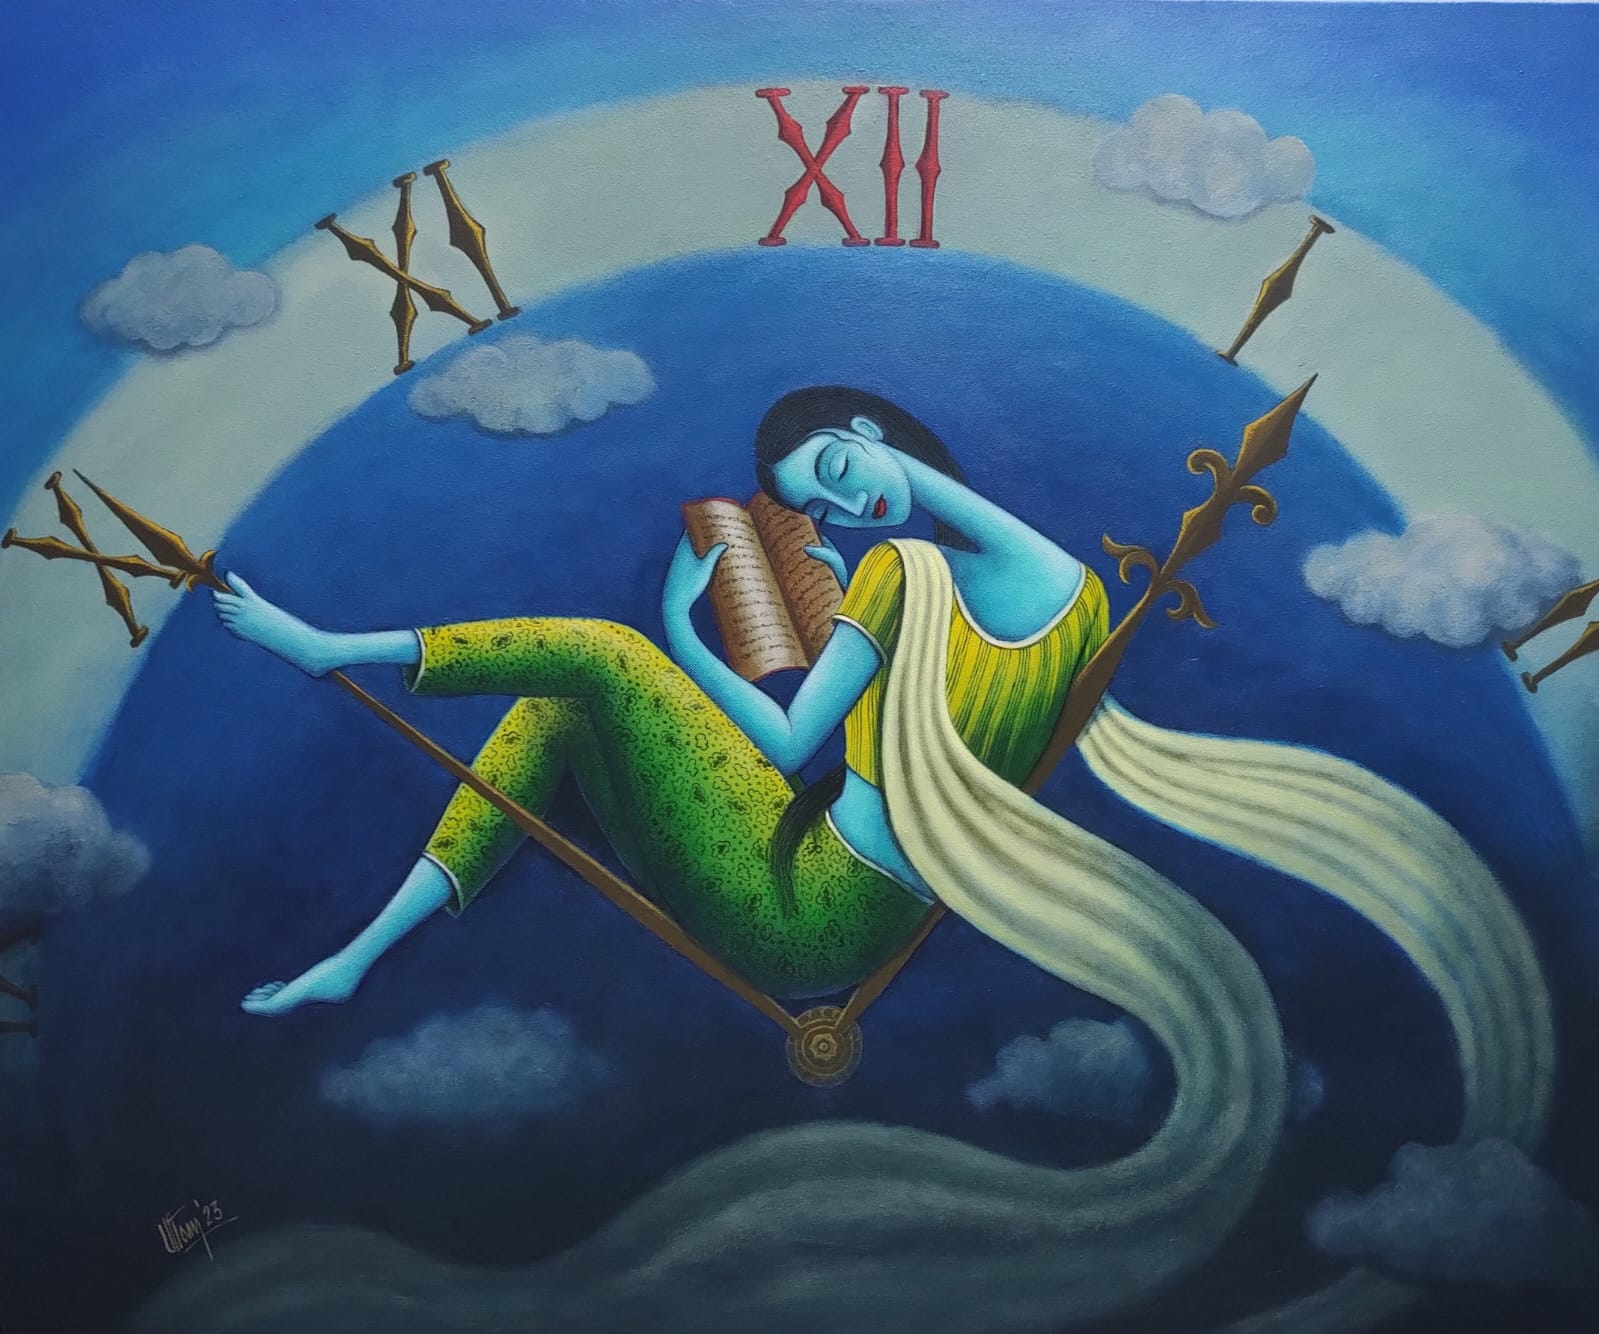 Figurative Painting with Acrylic on Canvas "Dream Time" art by Uttam Bhattacharya